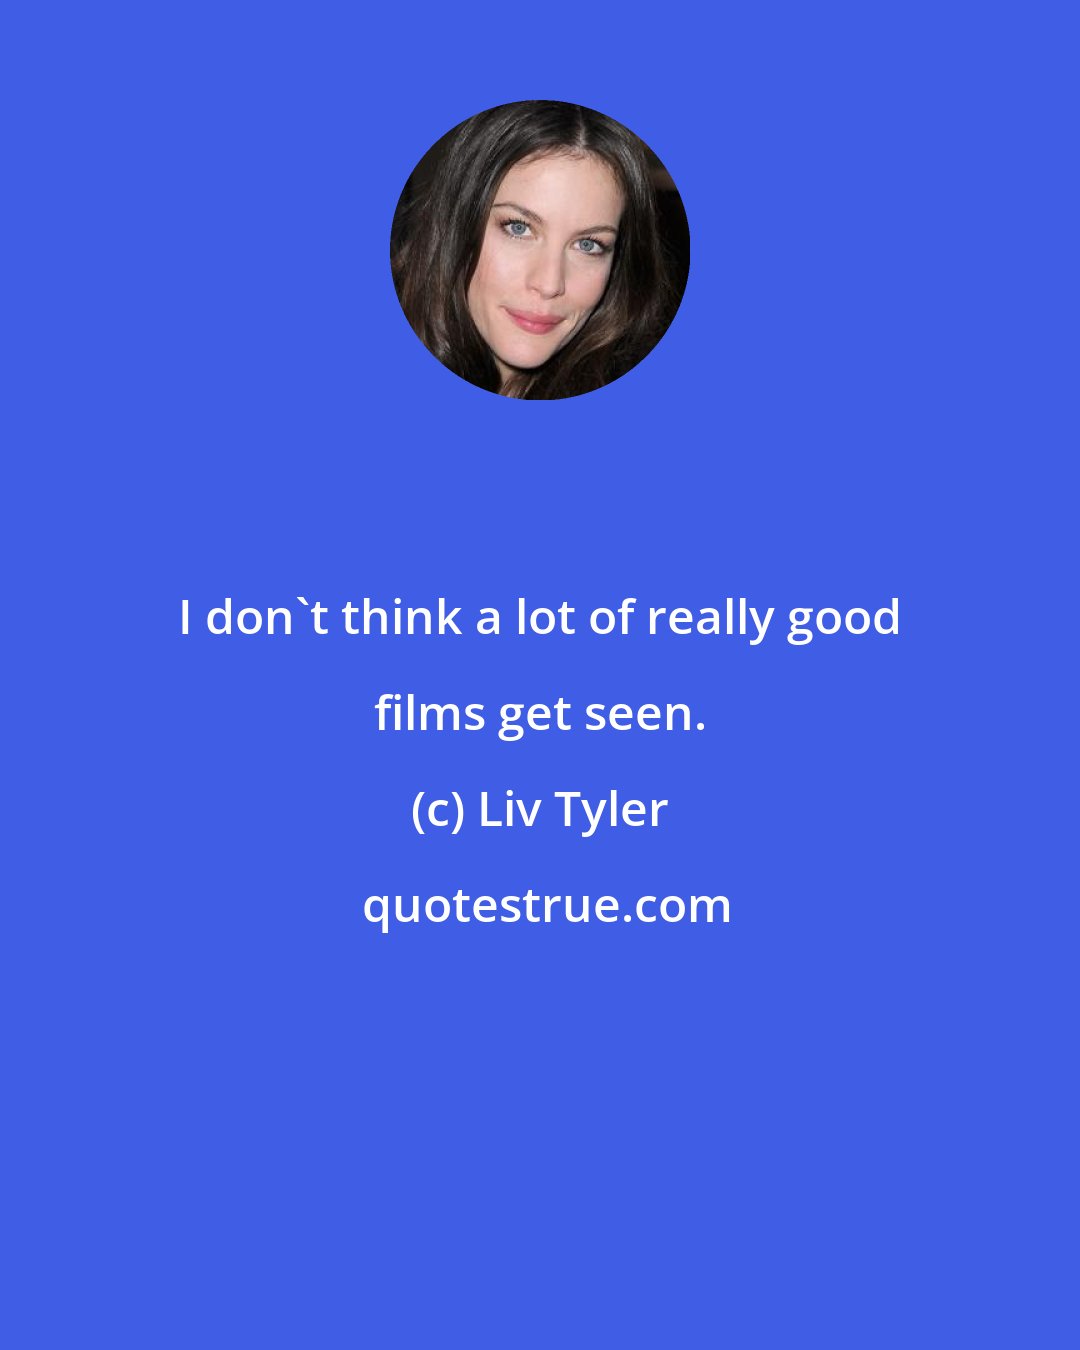 Liv Tyler: I don't think a lot of really good films get seen.